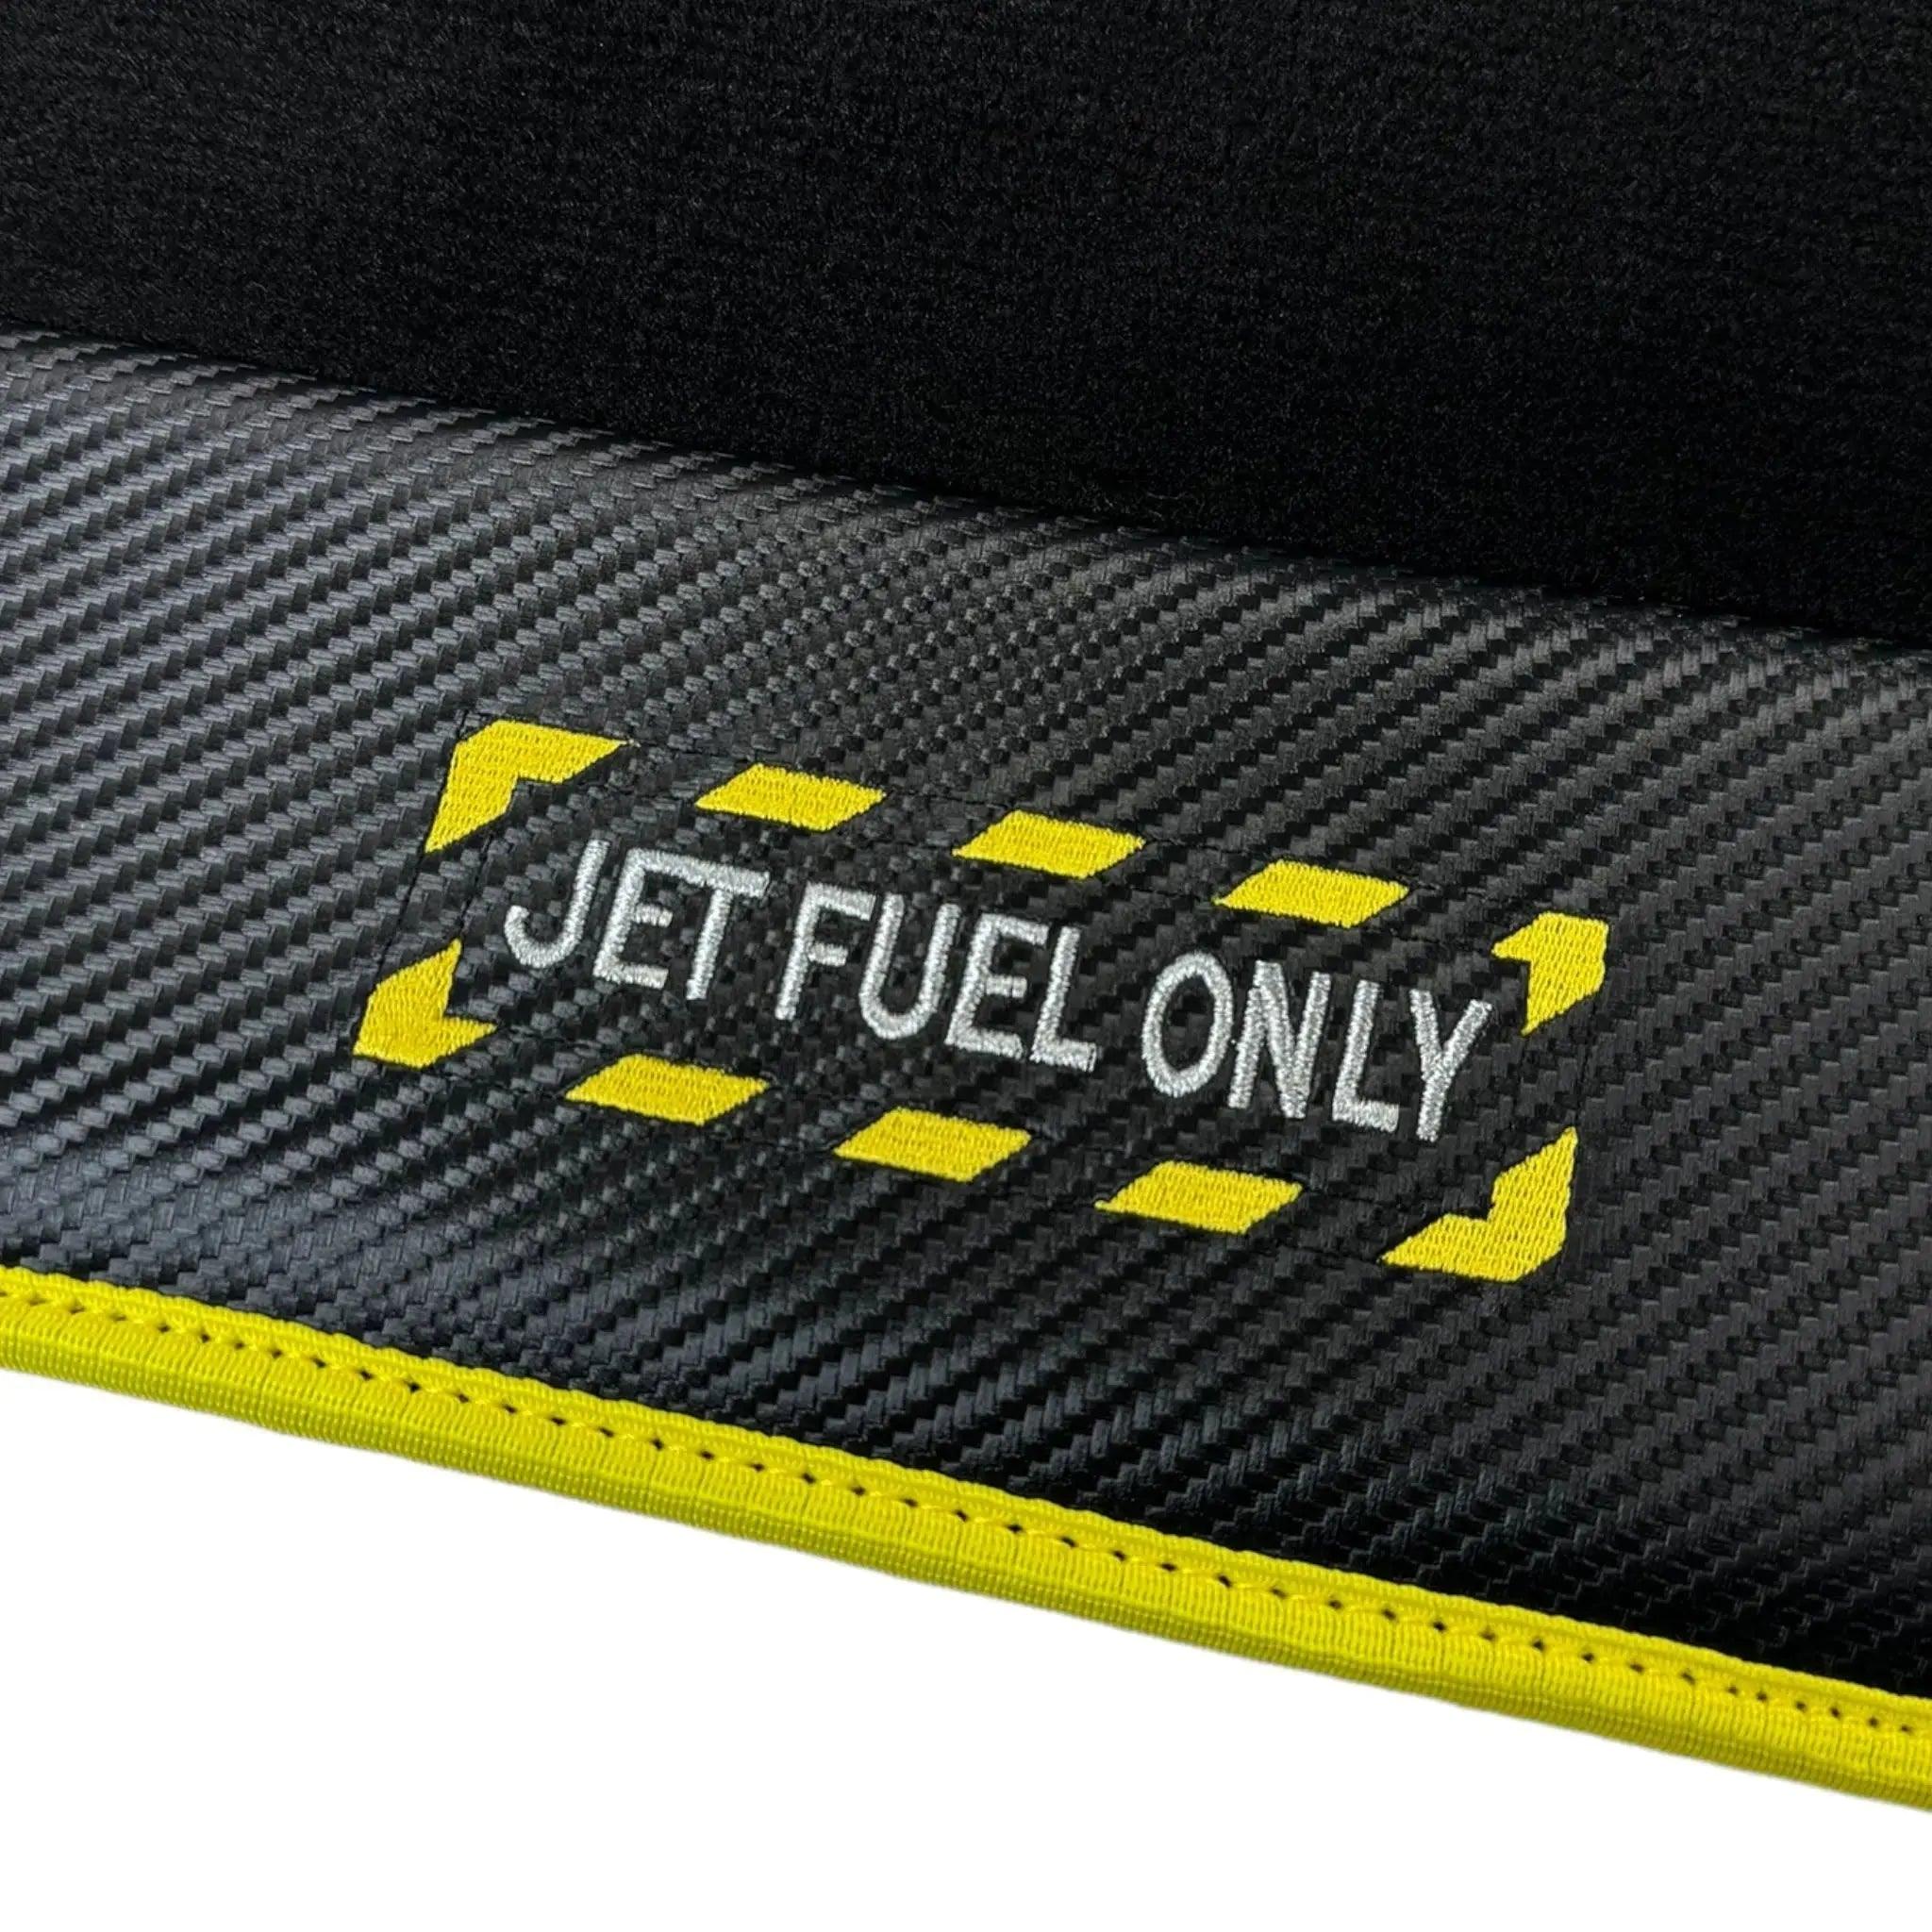 Black Floor Mats For BMW 7 Series G11 | Fighter Jet Edition | Yellow Trim AutoWin Brand - AutoWin